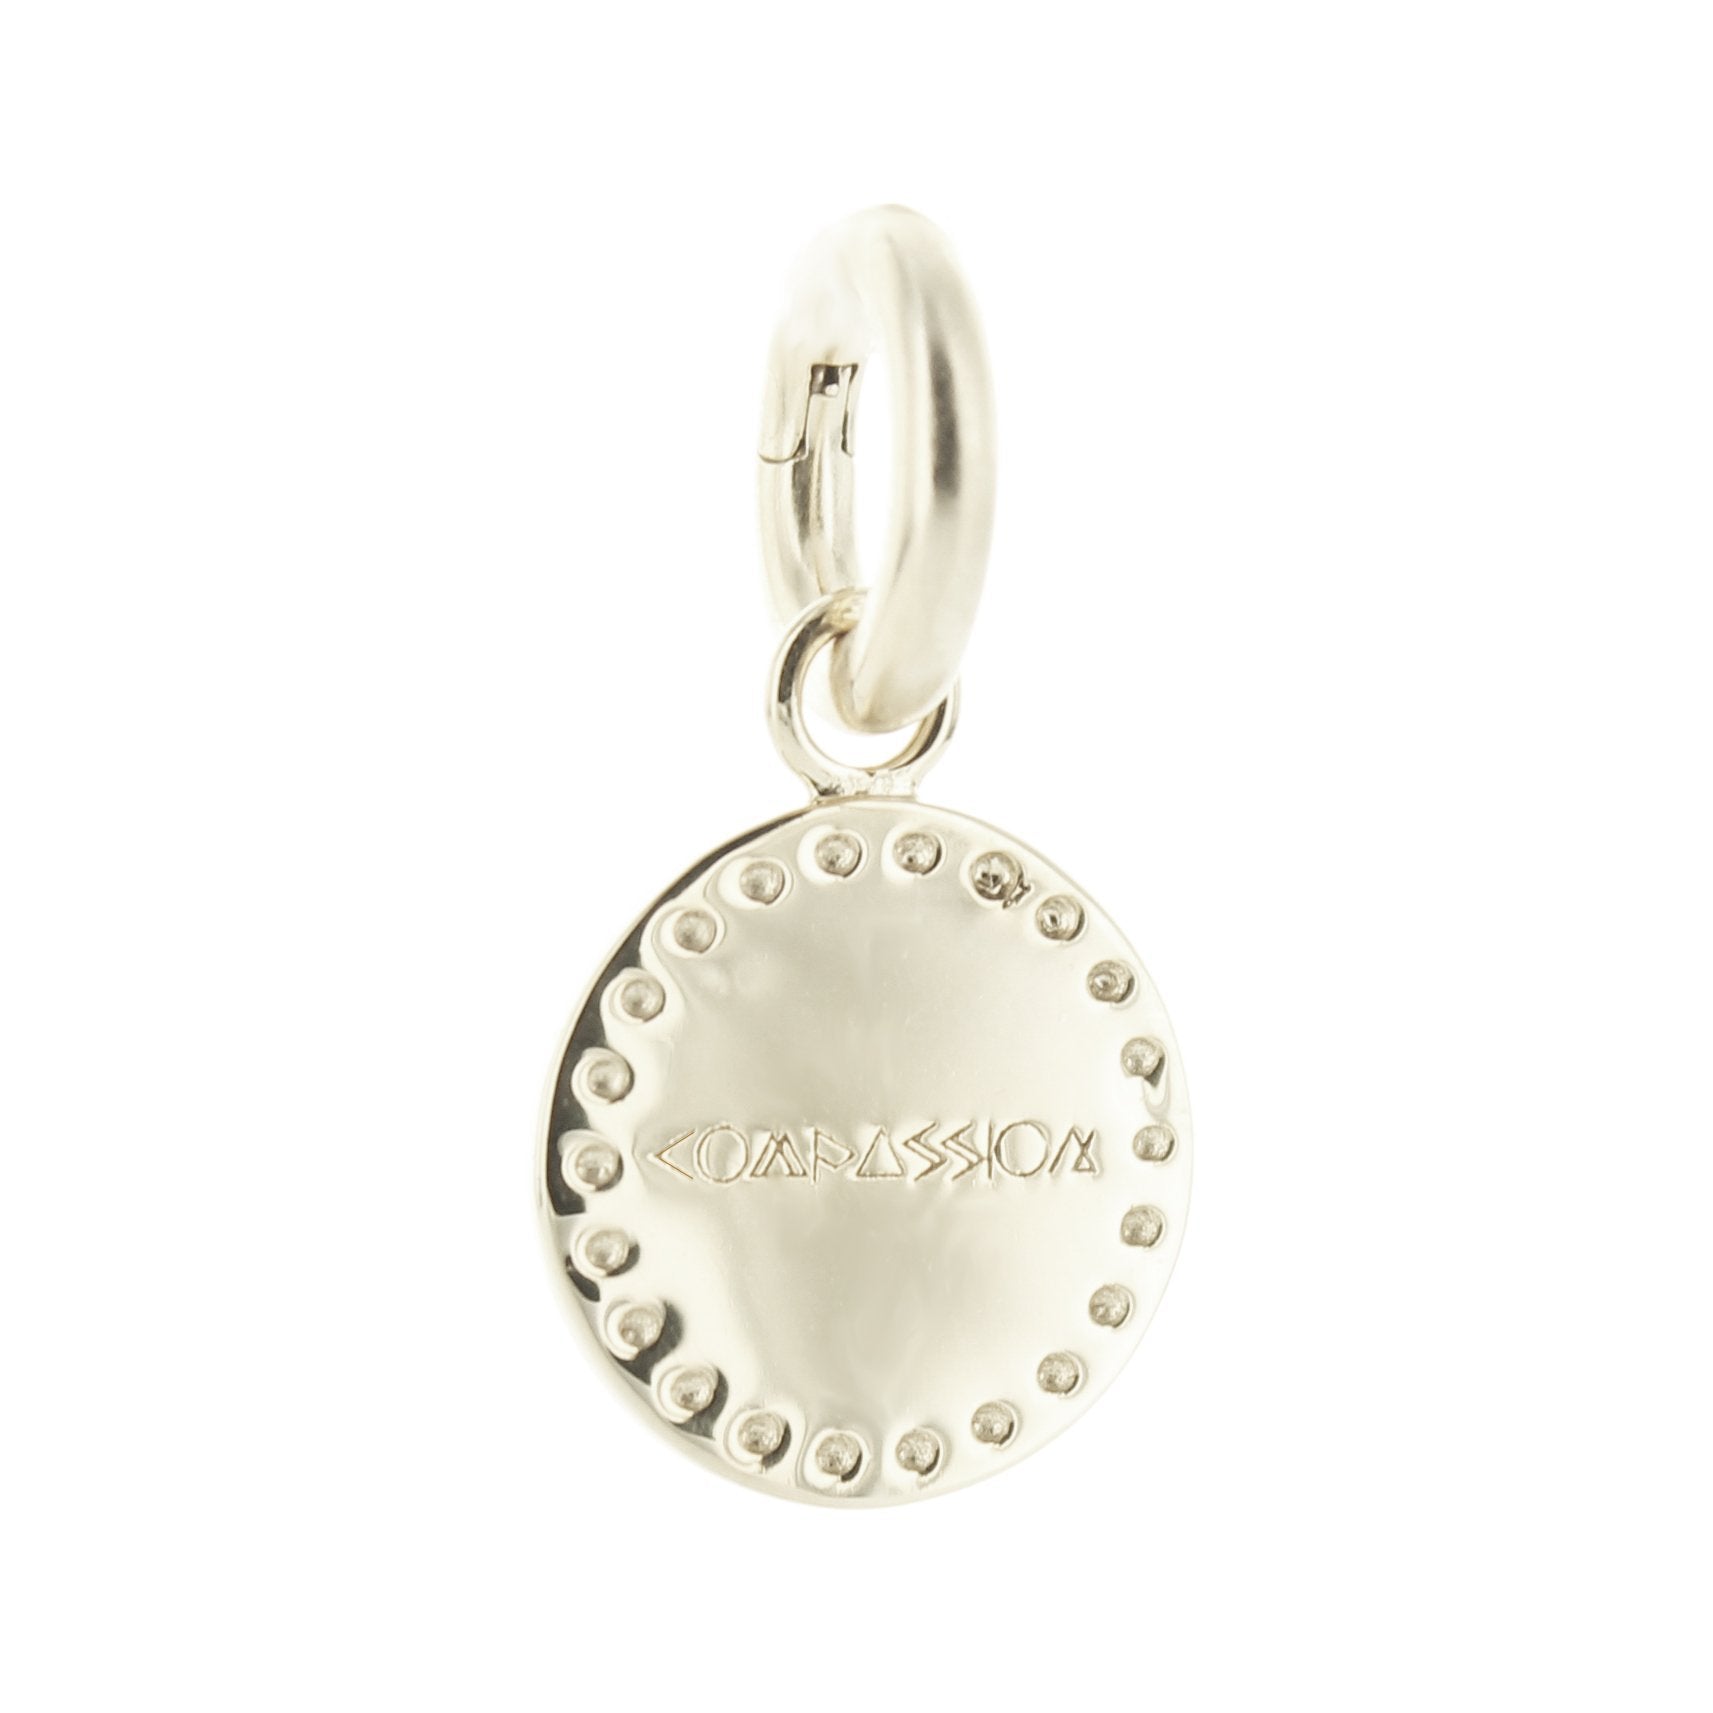 COMPASSION FLOATING CHARM PENDANT ALL METAL SILVER - SO PRETTY CARA COTTER